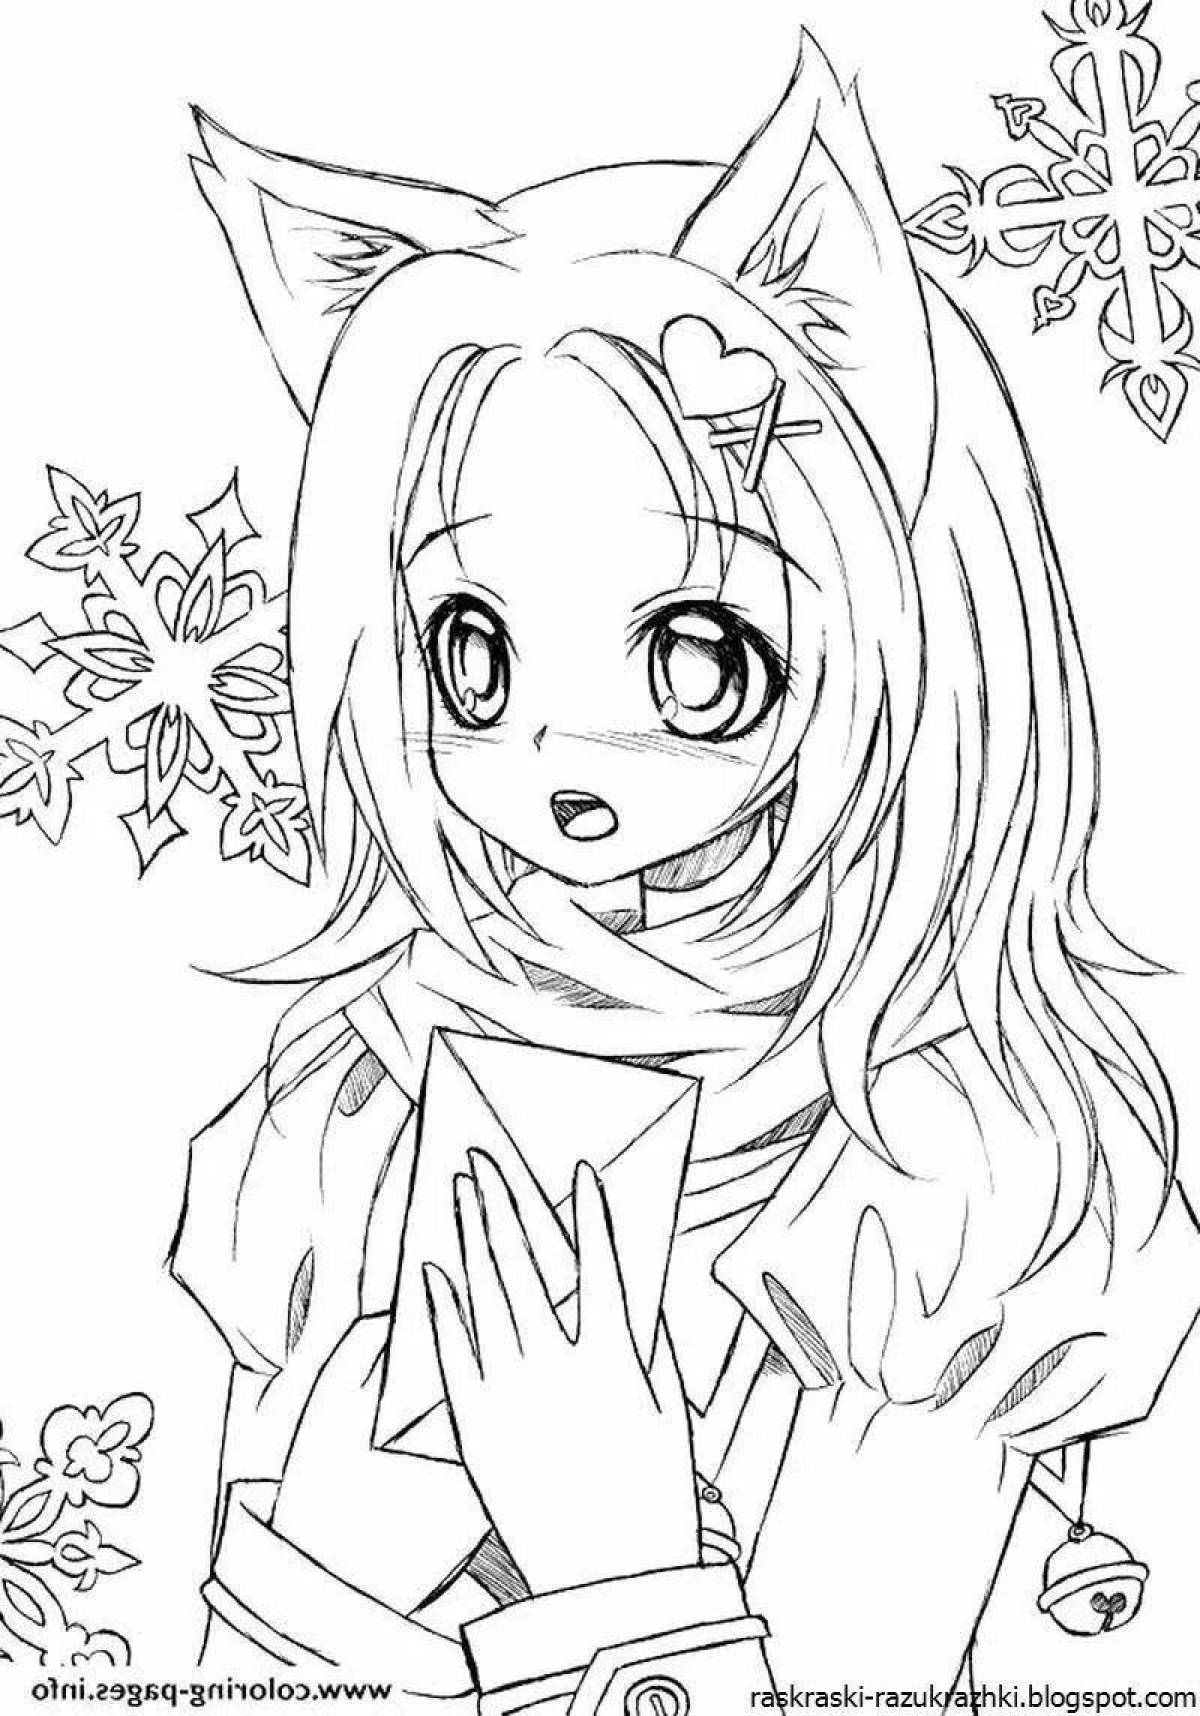 Awesome 18 years old anime coloring pages